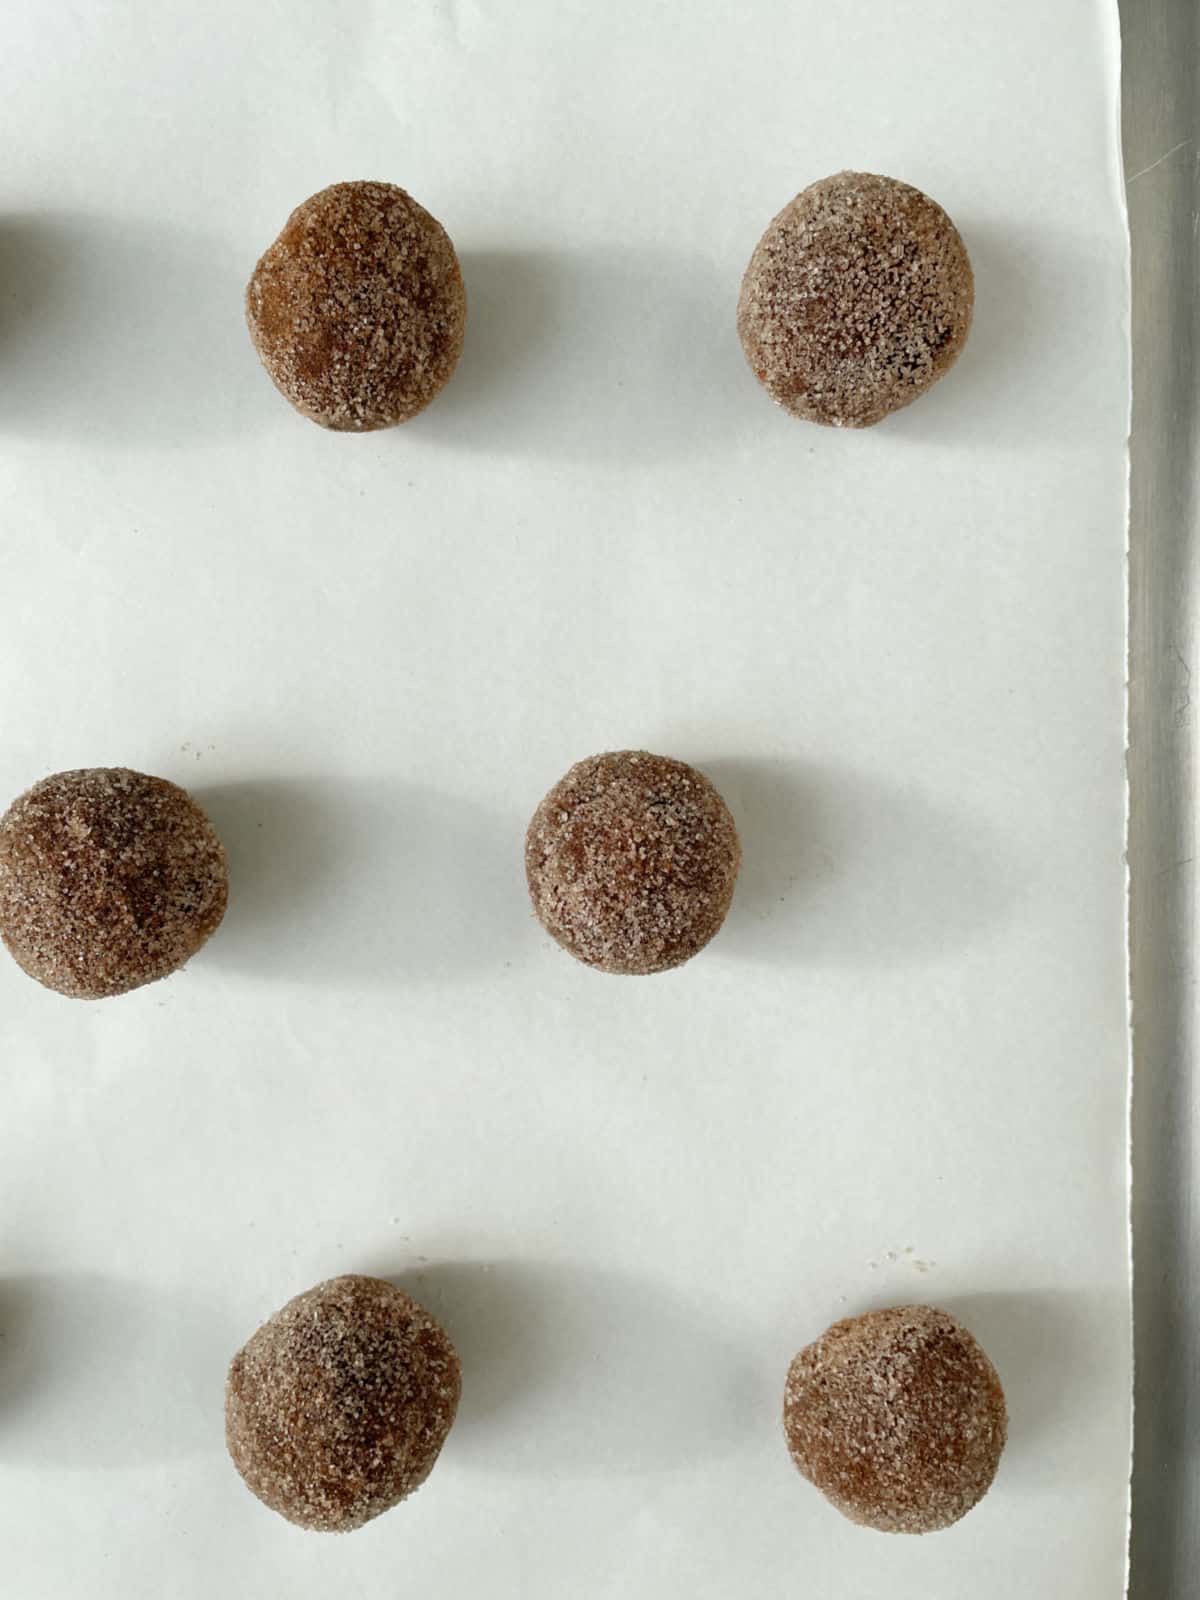 Parchment paper with chocolate cookie balls before baking.